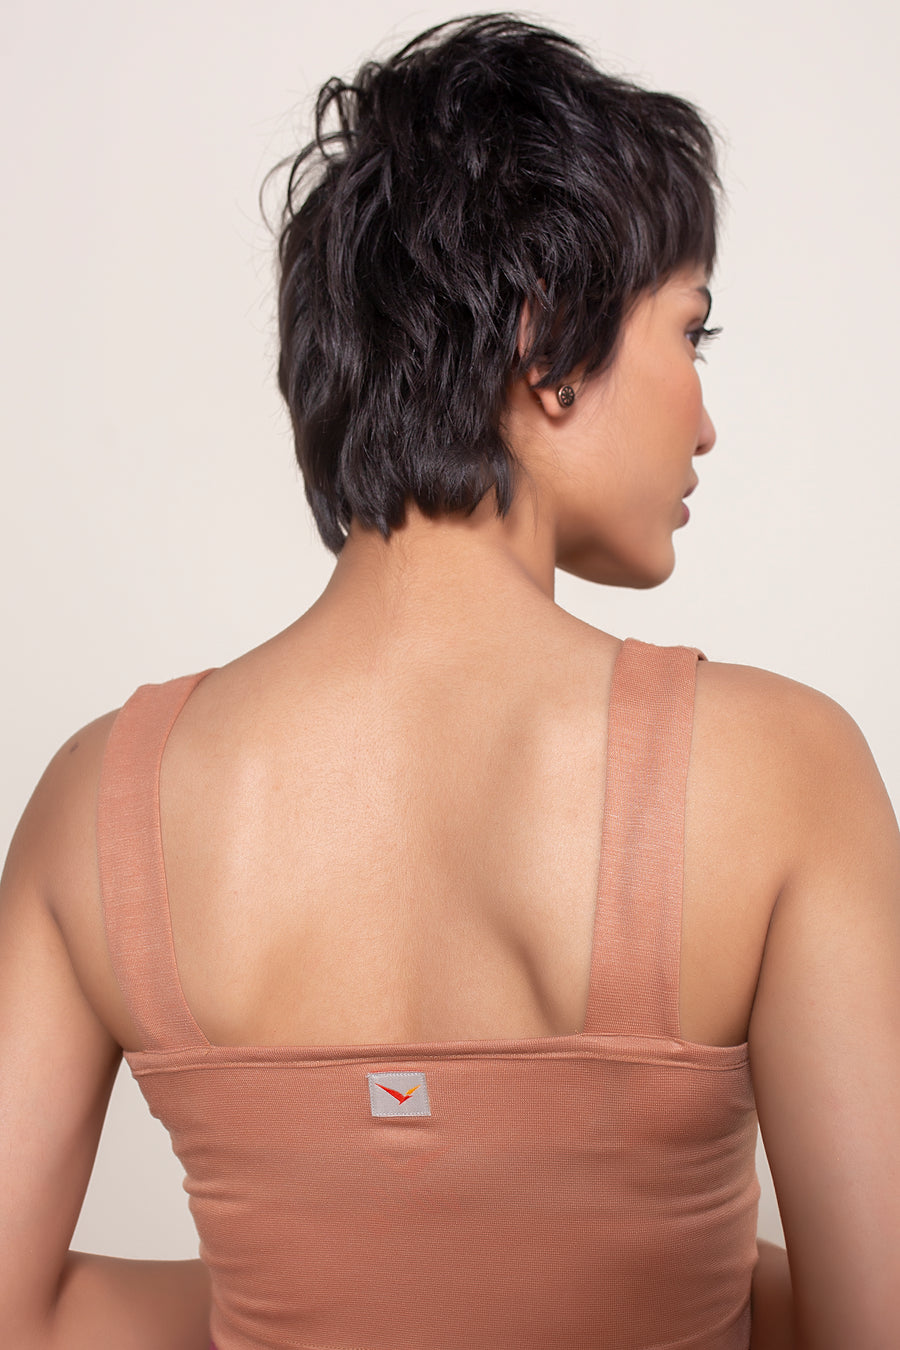 Women's Vera Crop in Brick | VOLO Apparel | The perfect athletic crop top made with a four way stretch bamboo fiber blend. Double lined and naturally odor resistant and antimicrobial. The Vera bamboo crop is reinforced stitched, the bamboo fiber comes with its own climate control properties, making the tops more breathable in the heat and more insulating in the cold.